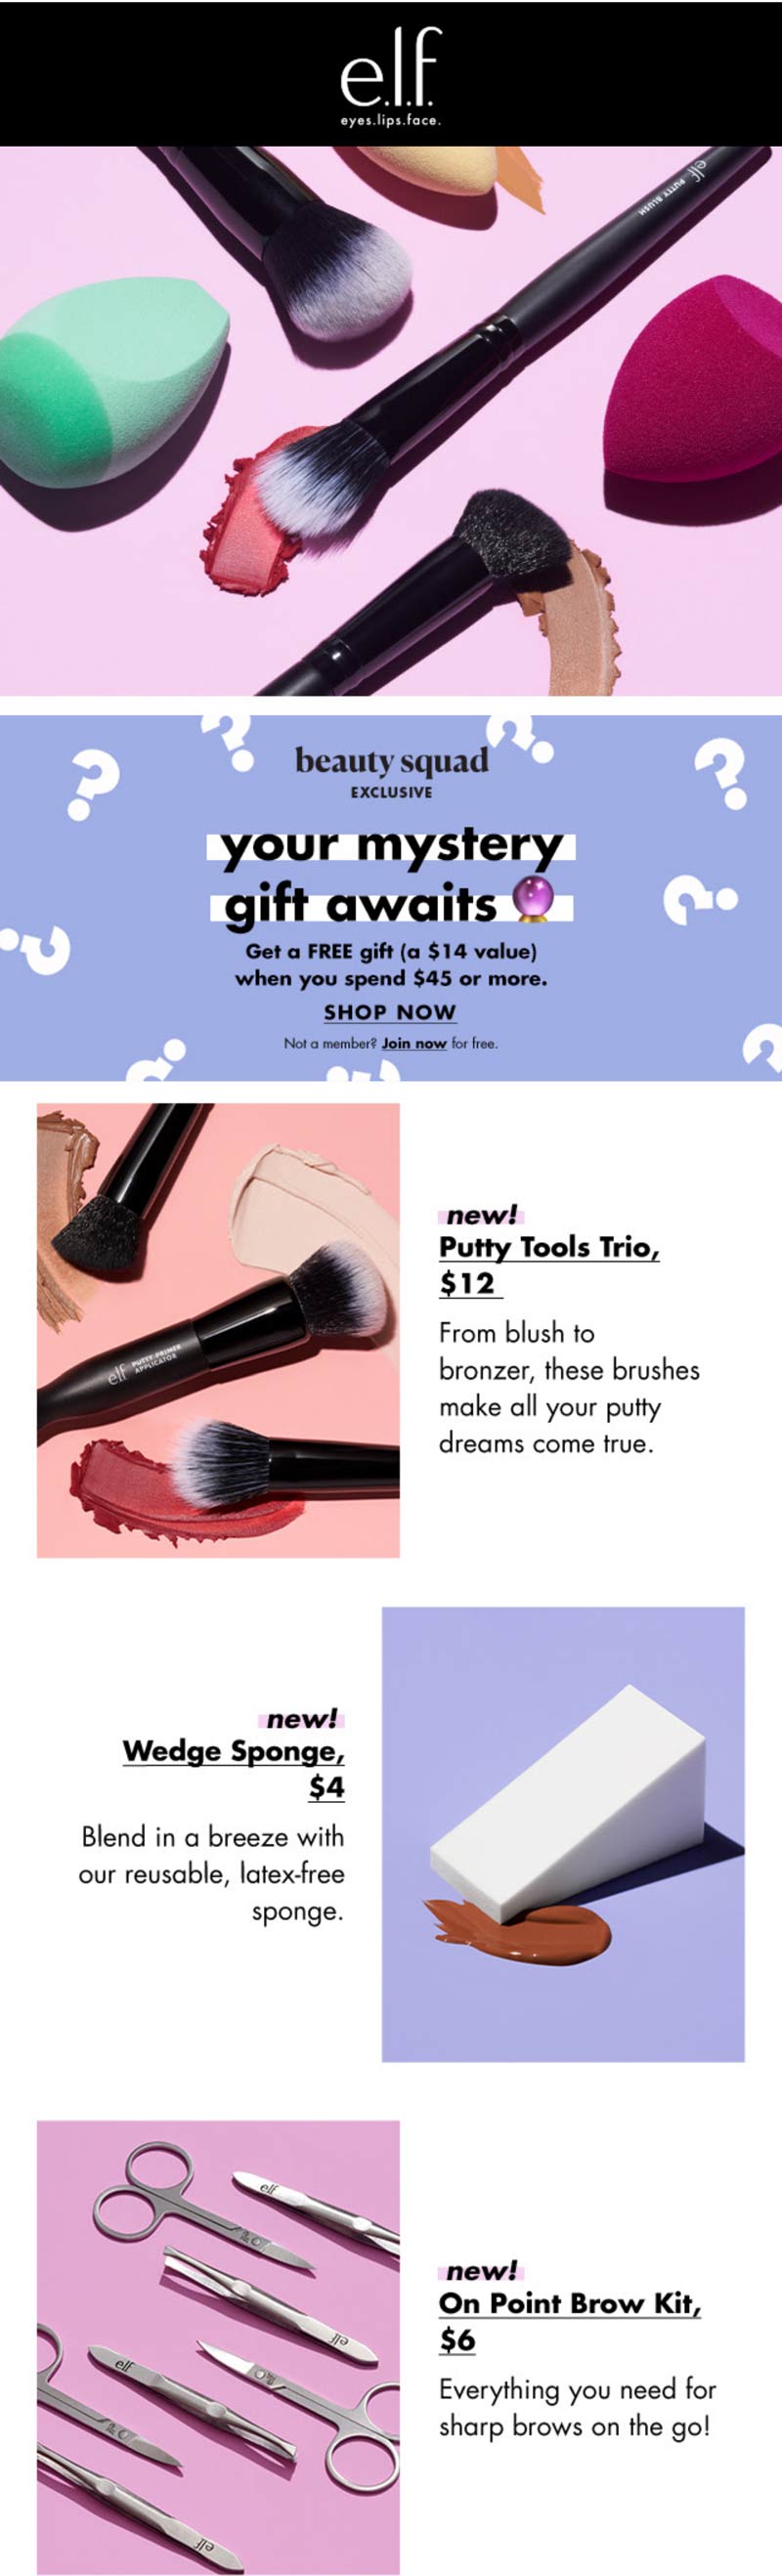 e.l.f. Cosmetics stores Coupon  $14 gift free on $45 at e.l.f. Cosmetics #elfcosmetics 